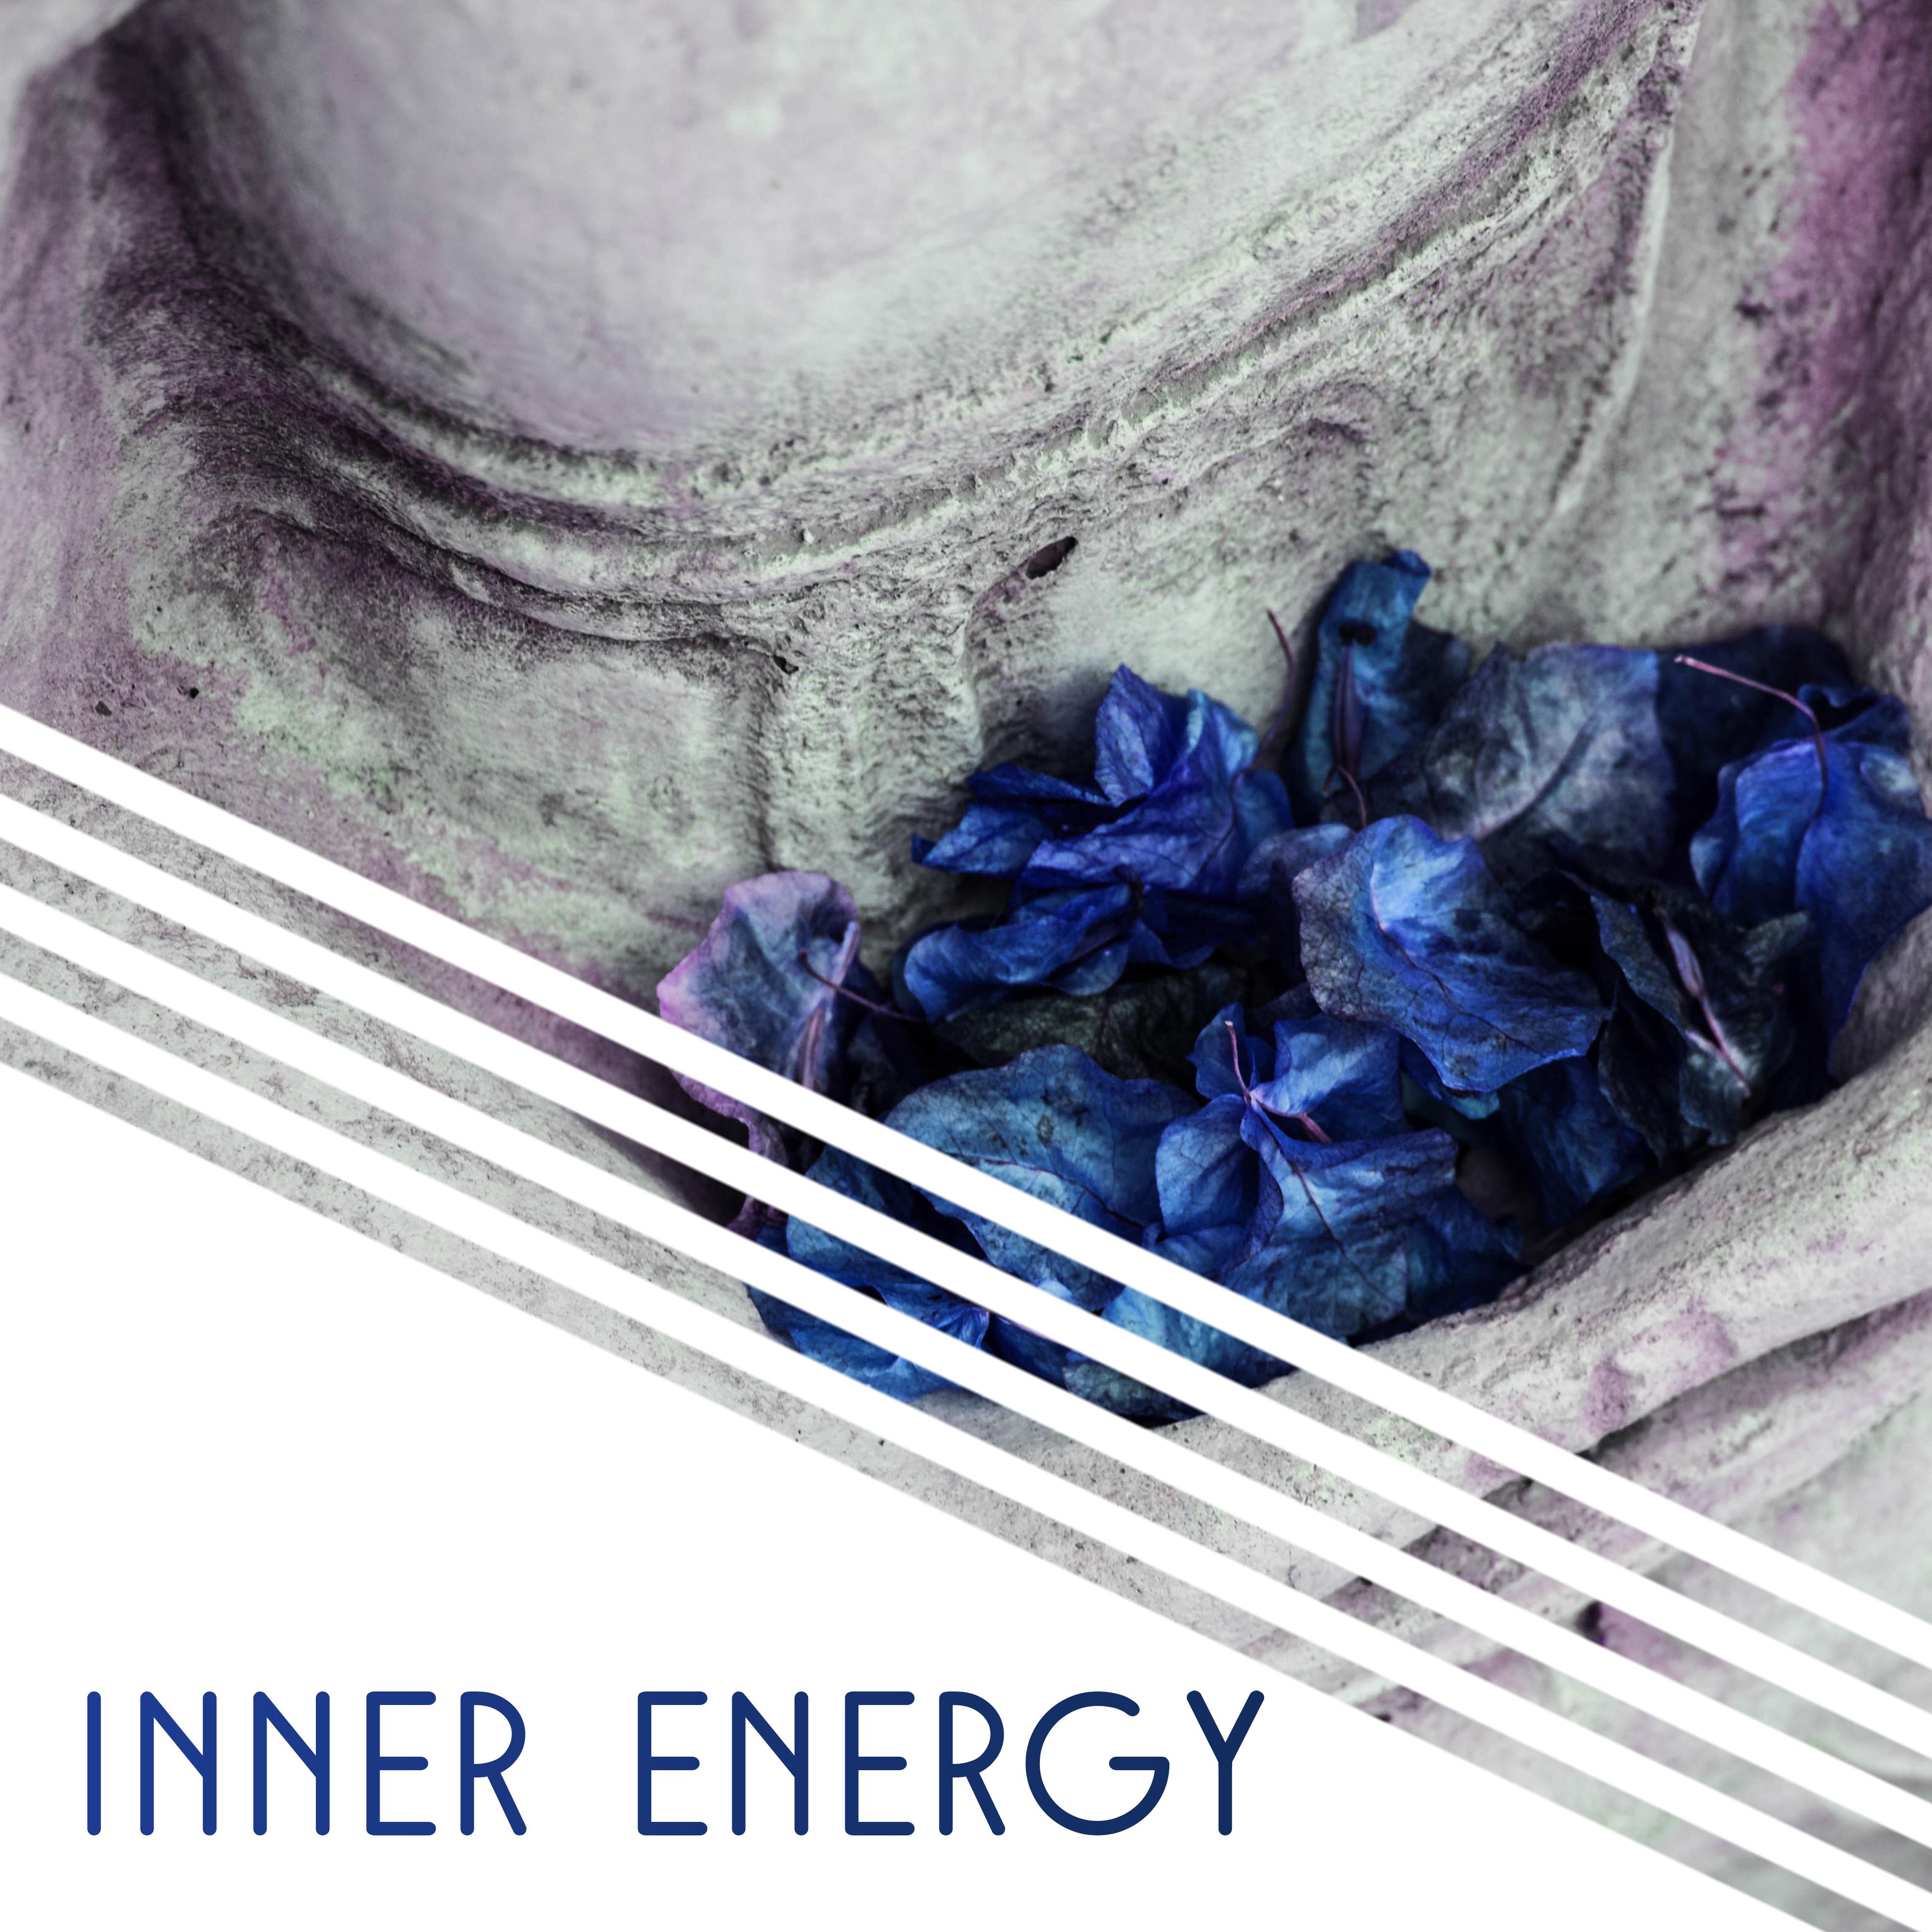 Inner Energy – Meditation Music, Sounds of Yoga, Deep Concentration, Zen, Relief, Relaxation, Peaceful Mind, Yoga Dream